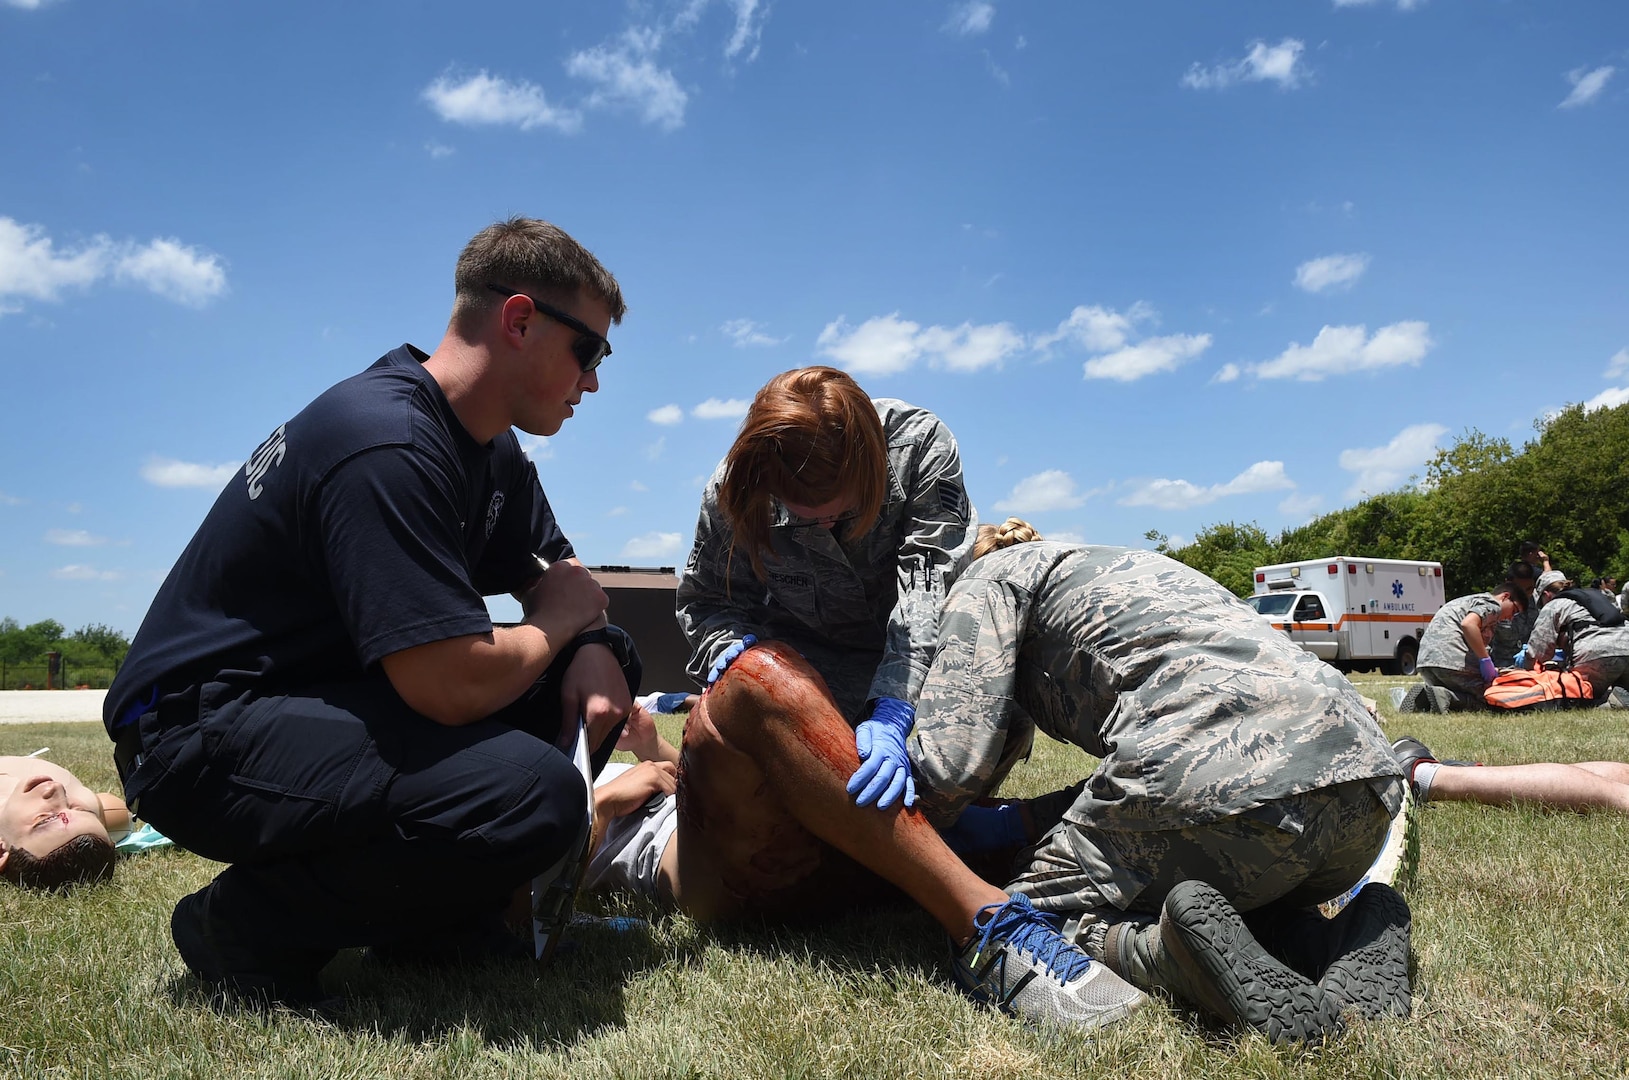 Senior Airman Lucas Reaume, a paramedic from the 59th Emergency Medical Services team, observes medics from the 59th MDW as they triage a patient during a July 13, 2016 disaster response exercise at Camp Bramble on Joint Base San Antonio-Lackland, Texas. The paramedics served as evaluators during the exercise, which simulated an aircraft crash. Evaluators were tasked to assess the response, and identify best practices and areas for improvement to ensure that 59th MDW warrior medics remain mission ready and capable. (U.S. Air Force photo/Staff Sgt. Jerilyn Quintanilla)